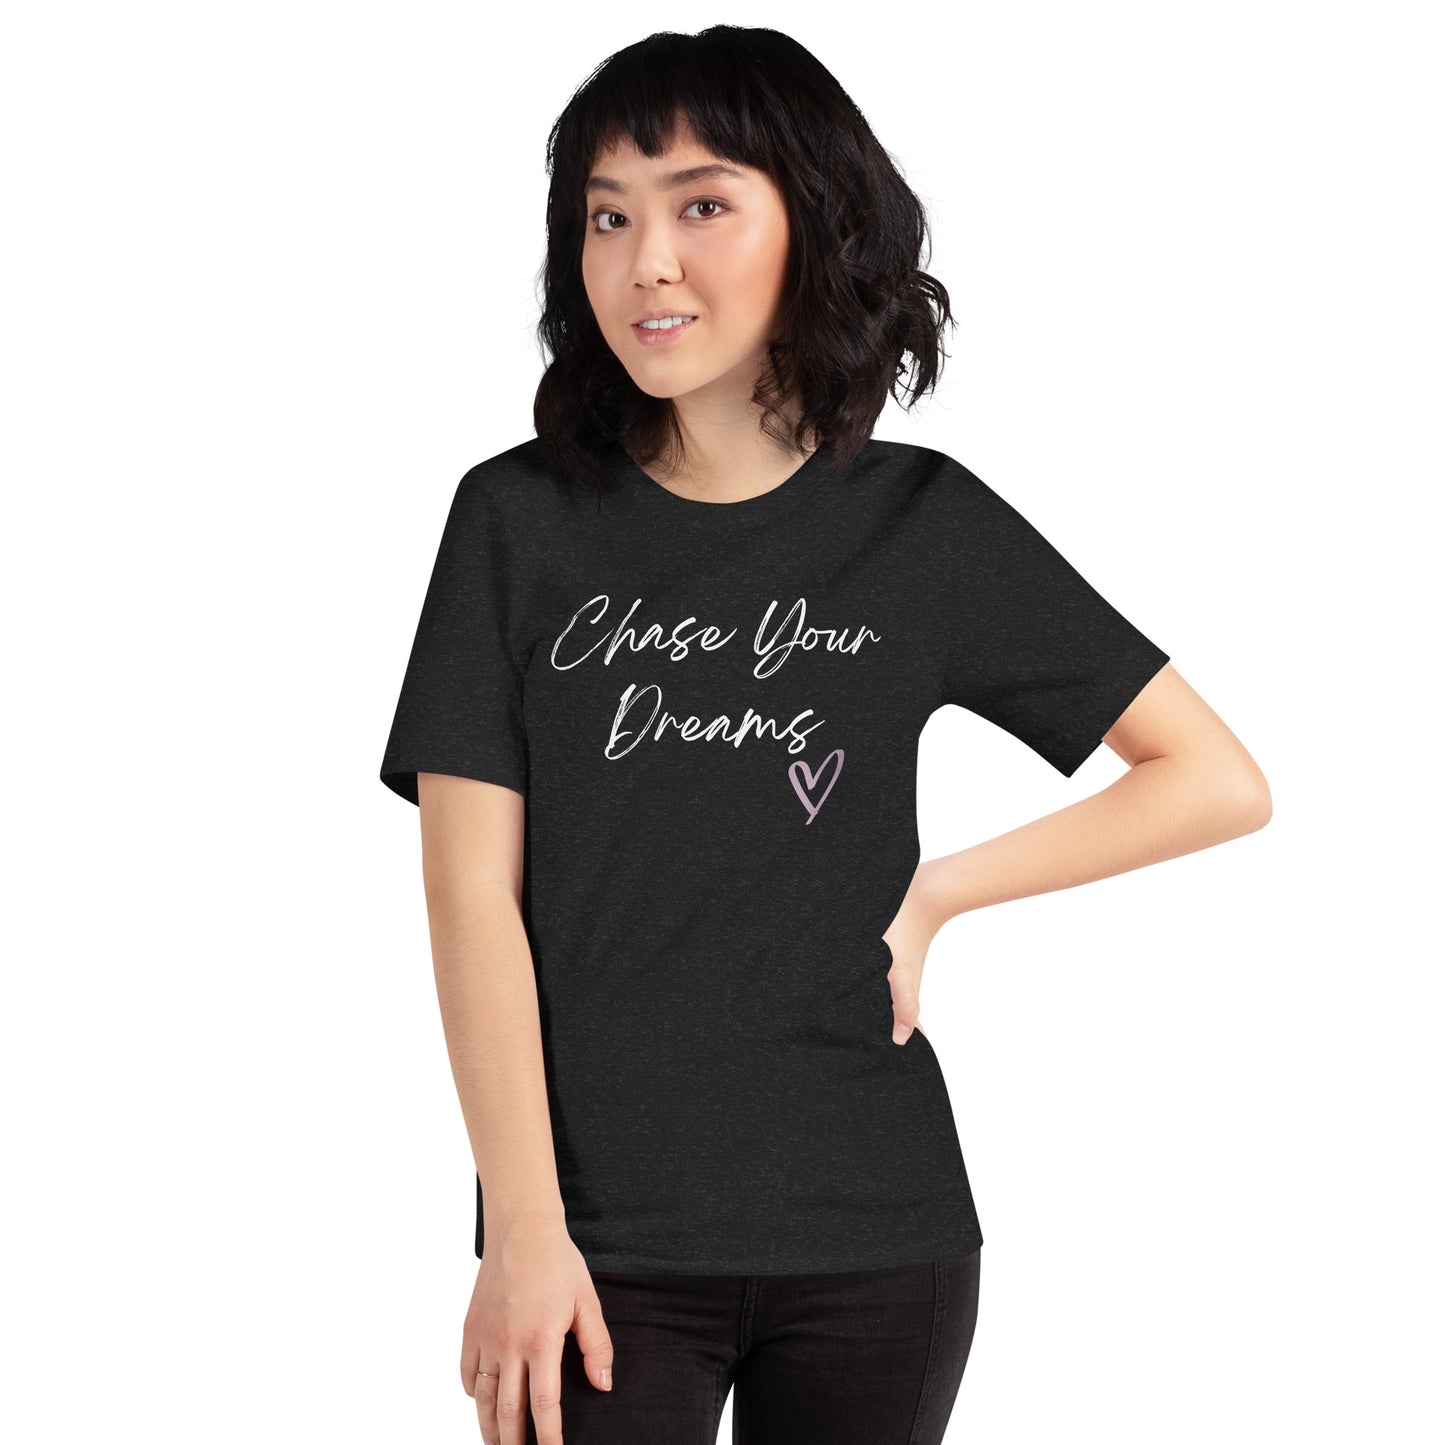 Chase Your Dreams T-shirt